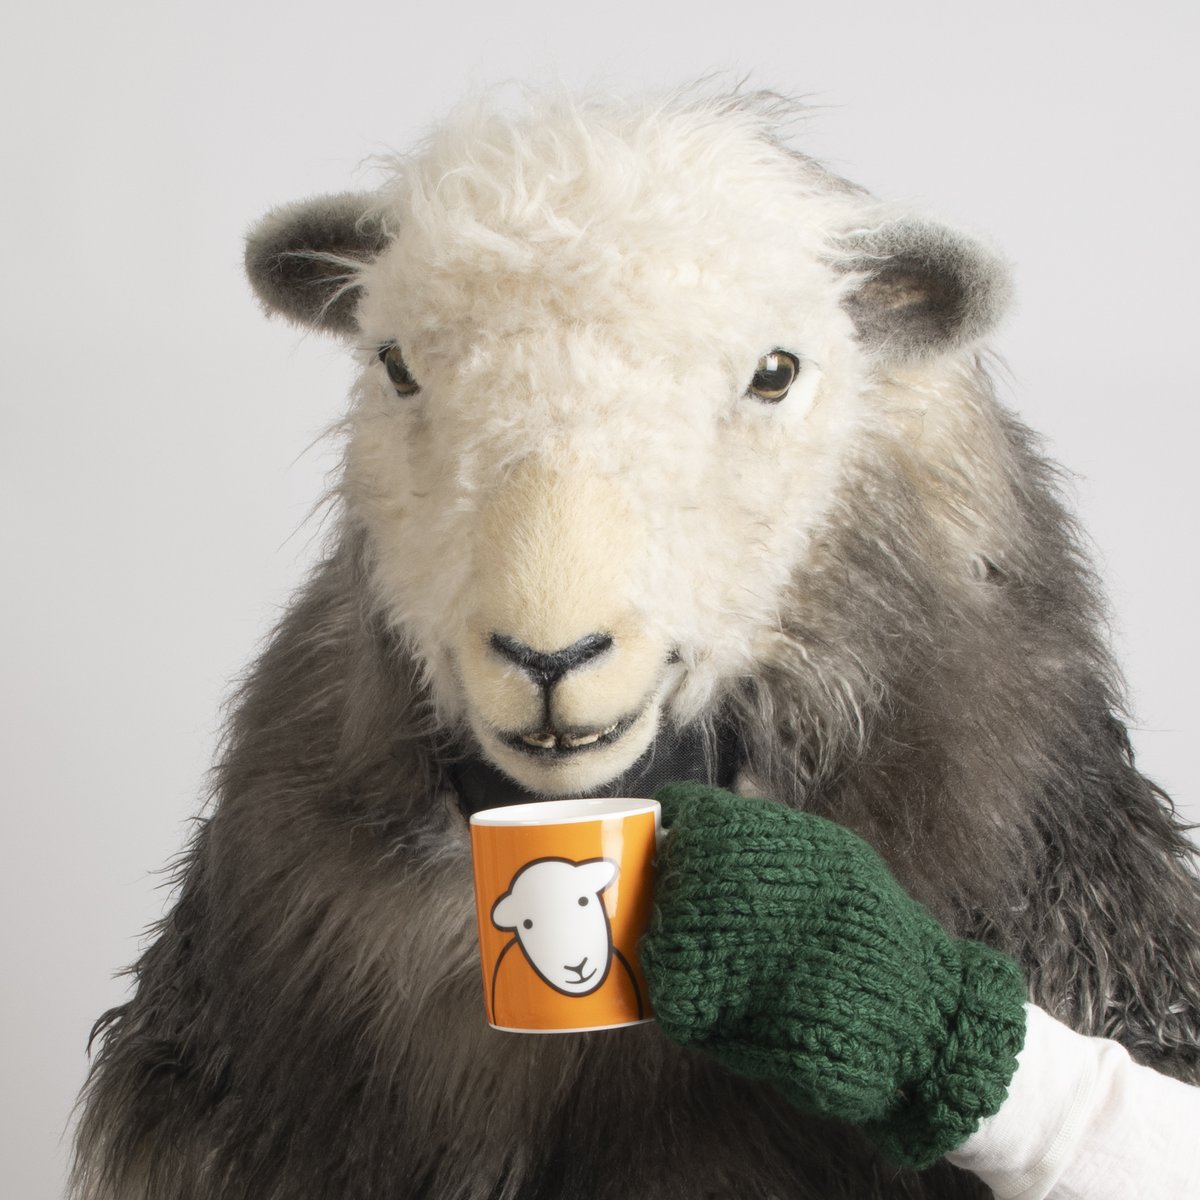 The baa-rilliant Heidi and Henrietta the Herdwicks 🐑(and their pram full of lambs) will be joining us to celebrate the opening of our BRAND NEW #Ambleside store this Saturday!

Pop by and say hi! 👋

#Herdy #Herdwick #BreadandButterCompnay #LakeDistrict